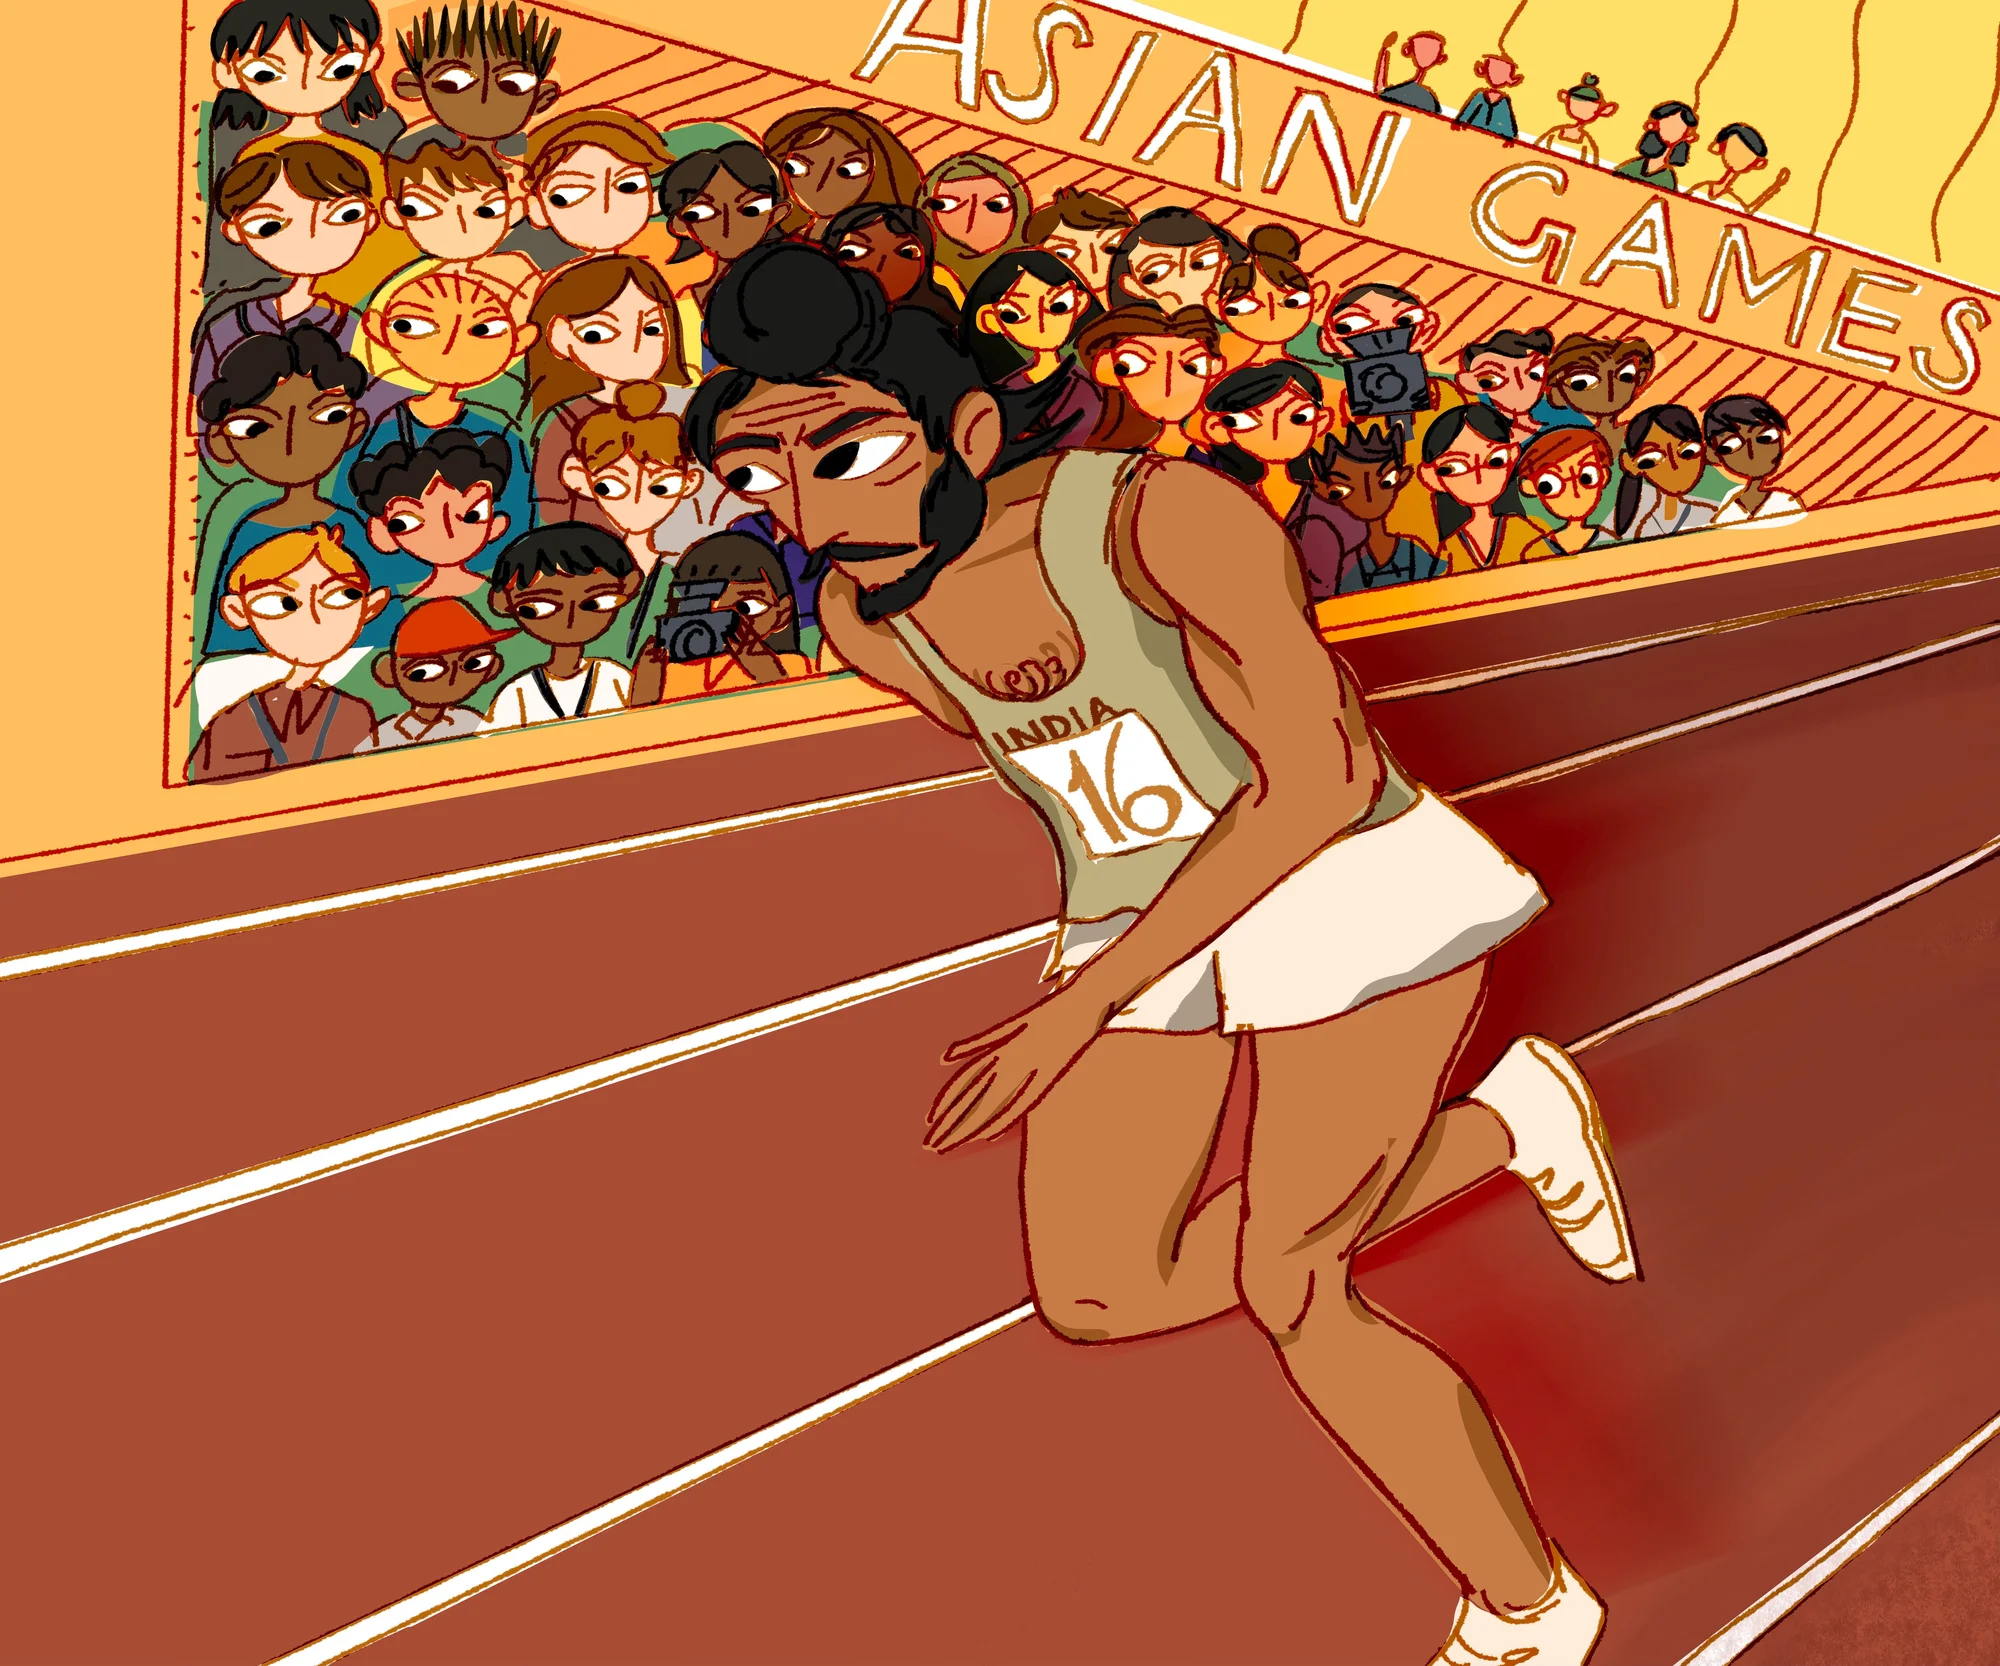 Illustration of a runner mid-run in a racetrack  wearing tan colored tanktop with “India 16” on it, shorts, and shoes. A crowd watches from the bleachers labeled “Asian Games”.